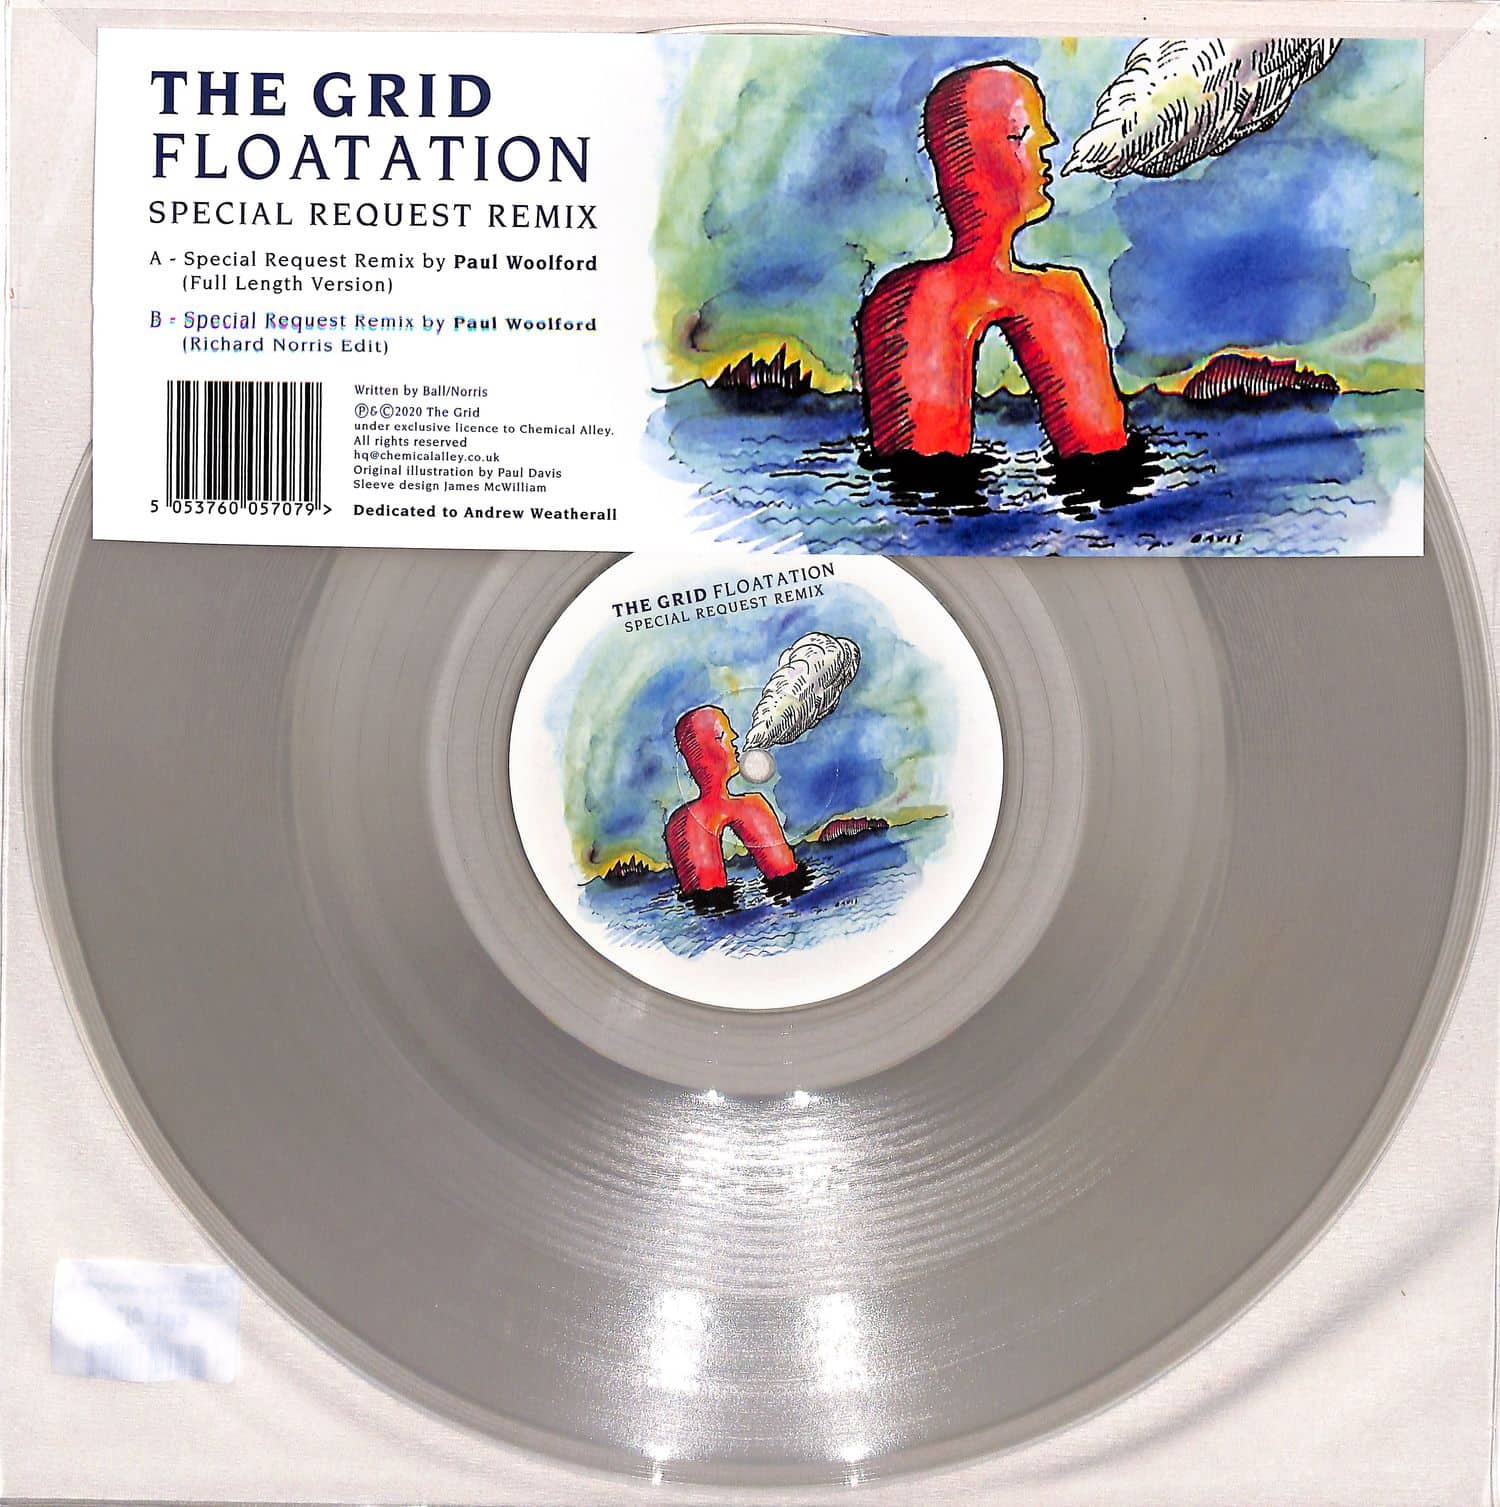 The Grid - FLOTATION / PAUL WOOLFORD SPECIAL REQUEST 